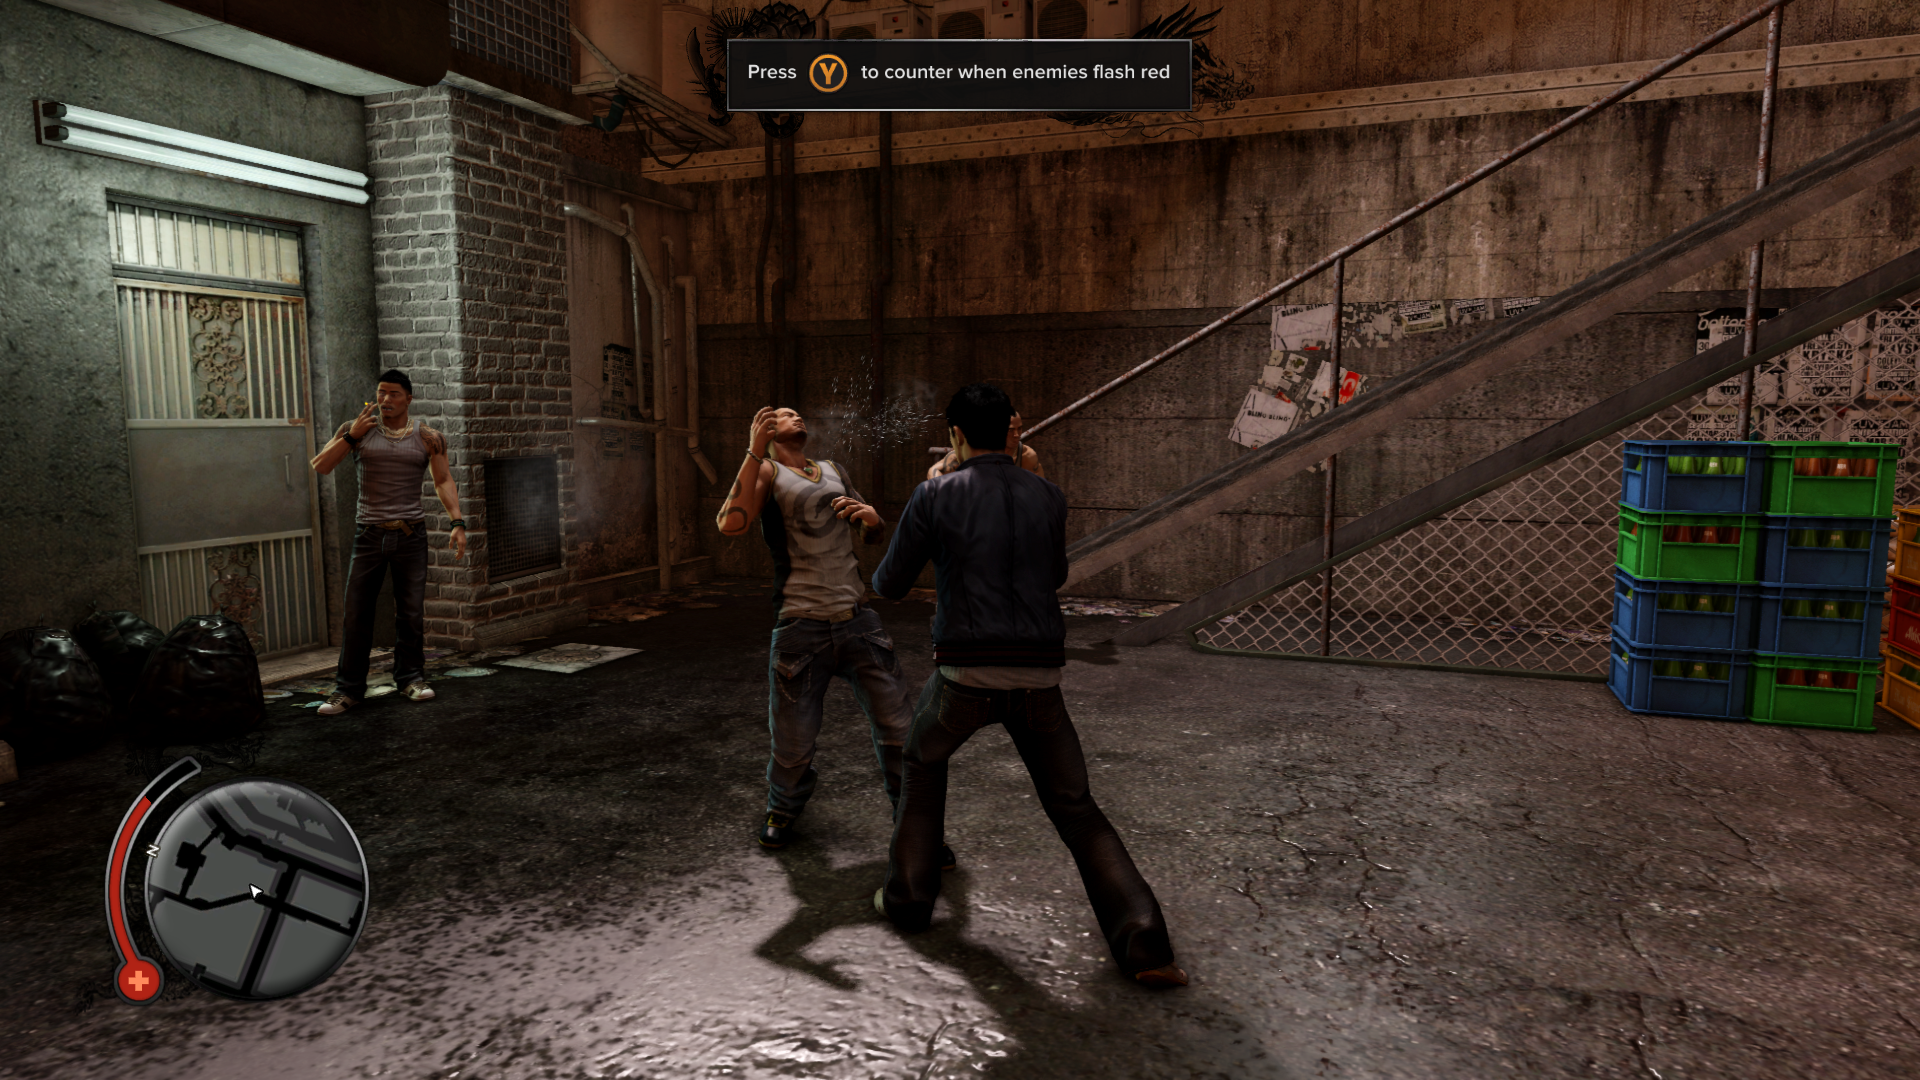 sleeping dogs definitive edition pc fix